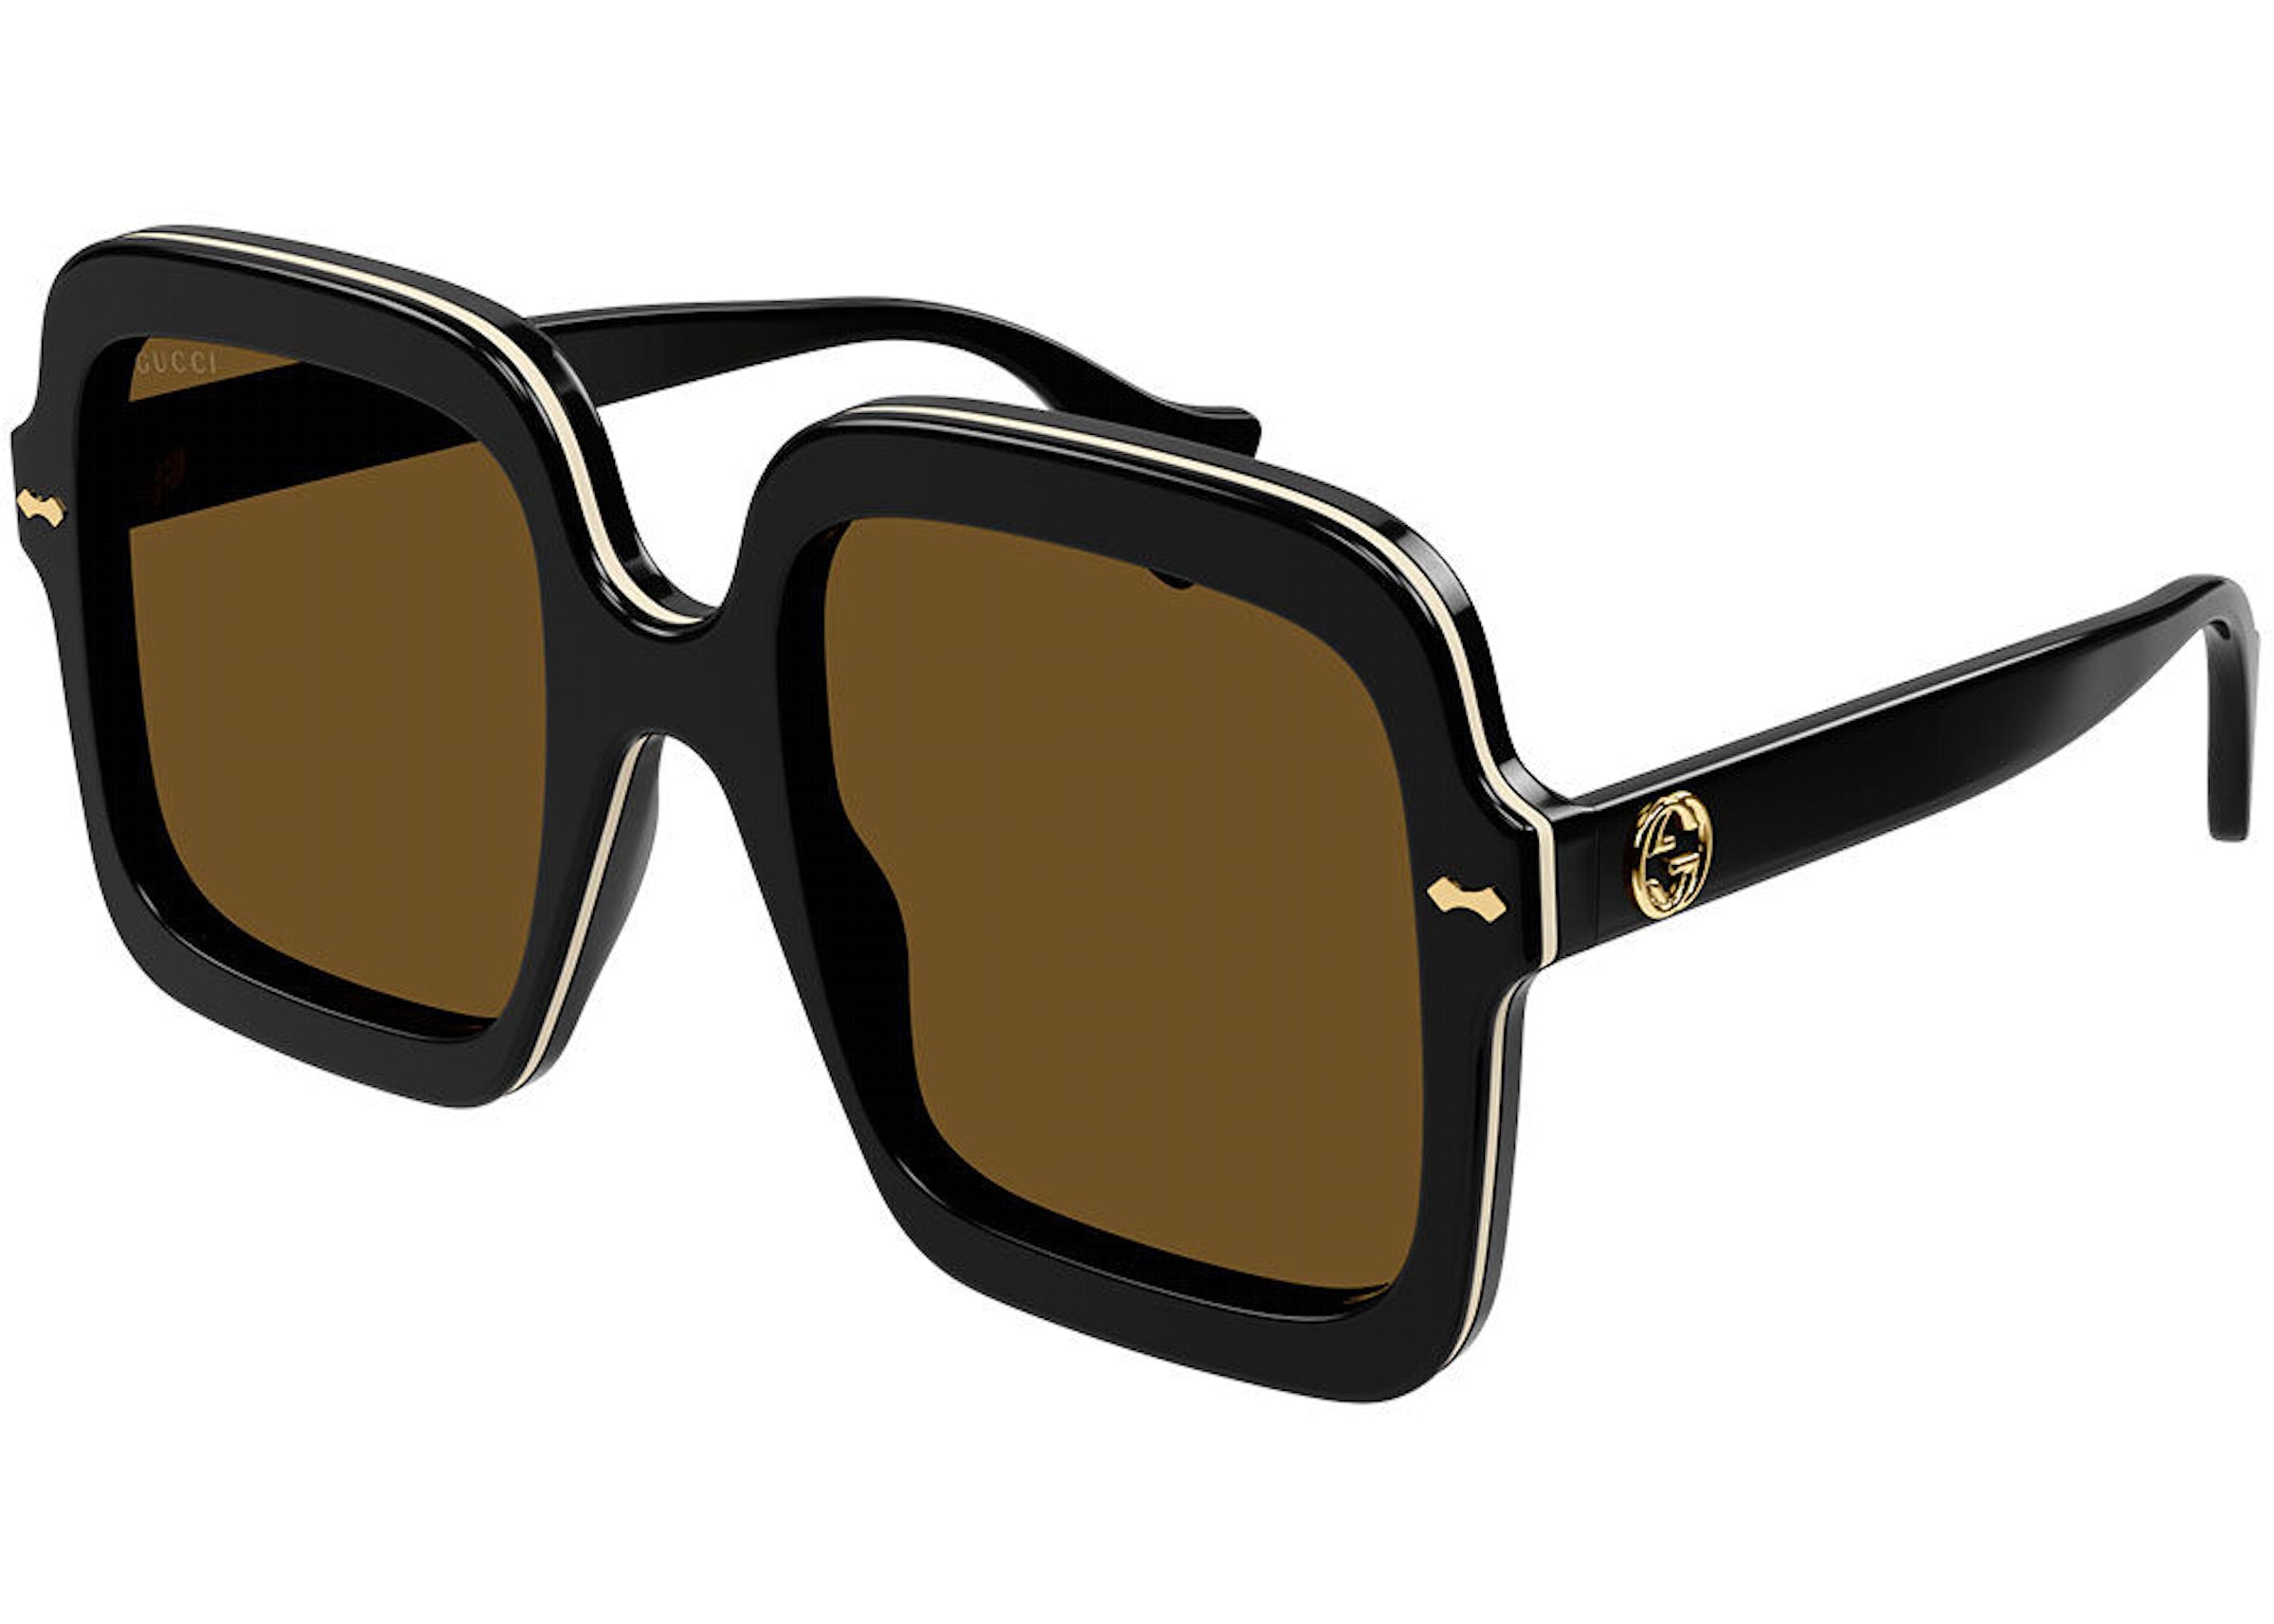 Gucci Square Sunglasses Black (GG1241S-001-FR) in Acetate with Gold-tone -  US